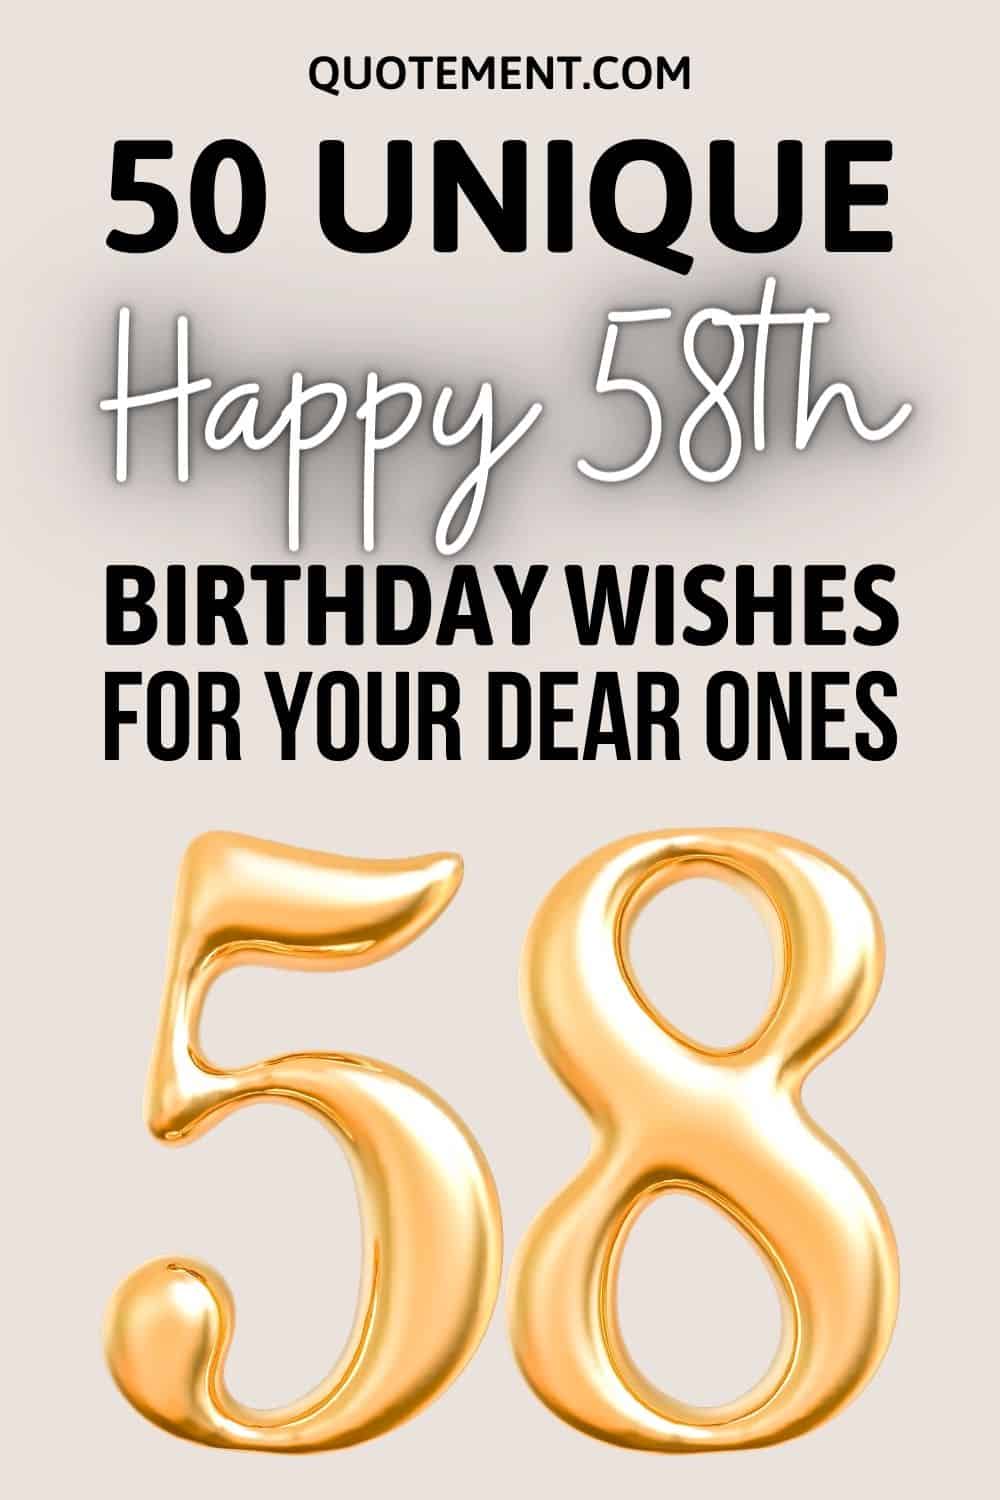 50 Unique Happy 58th Birthday Wishes For Your Dear Ones
